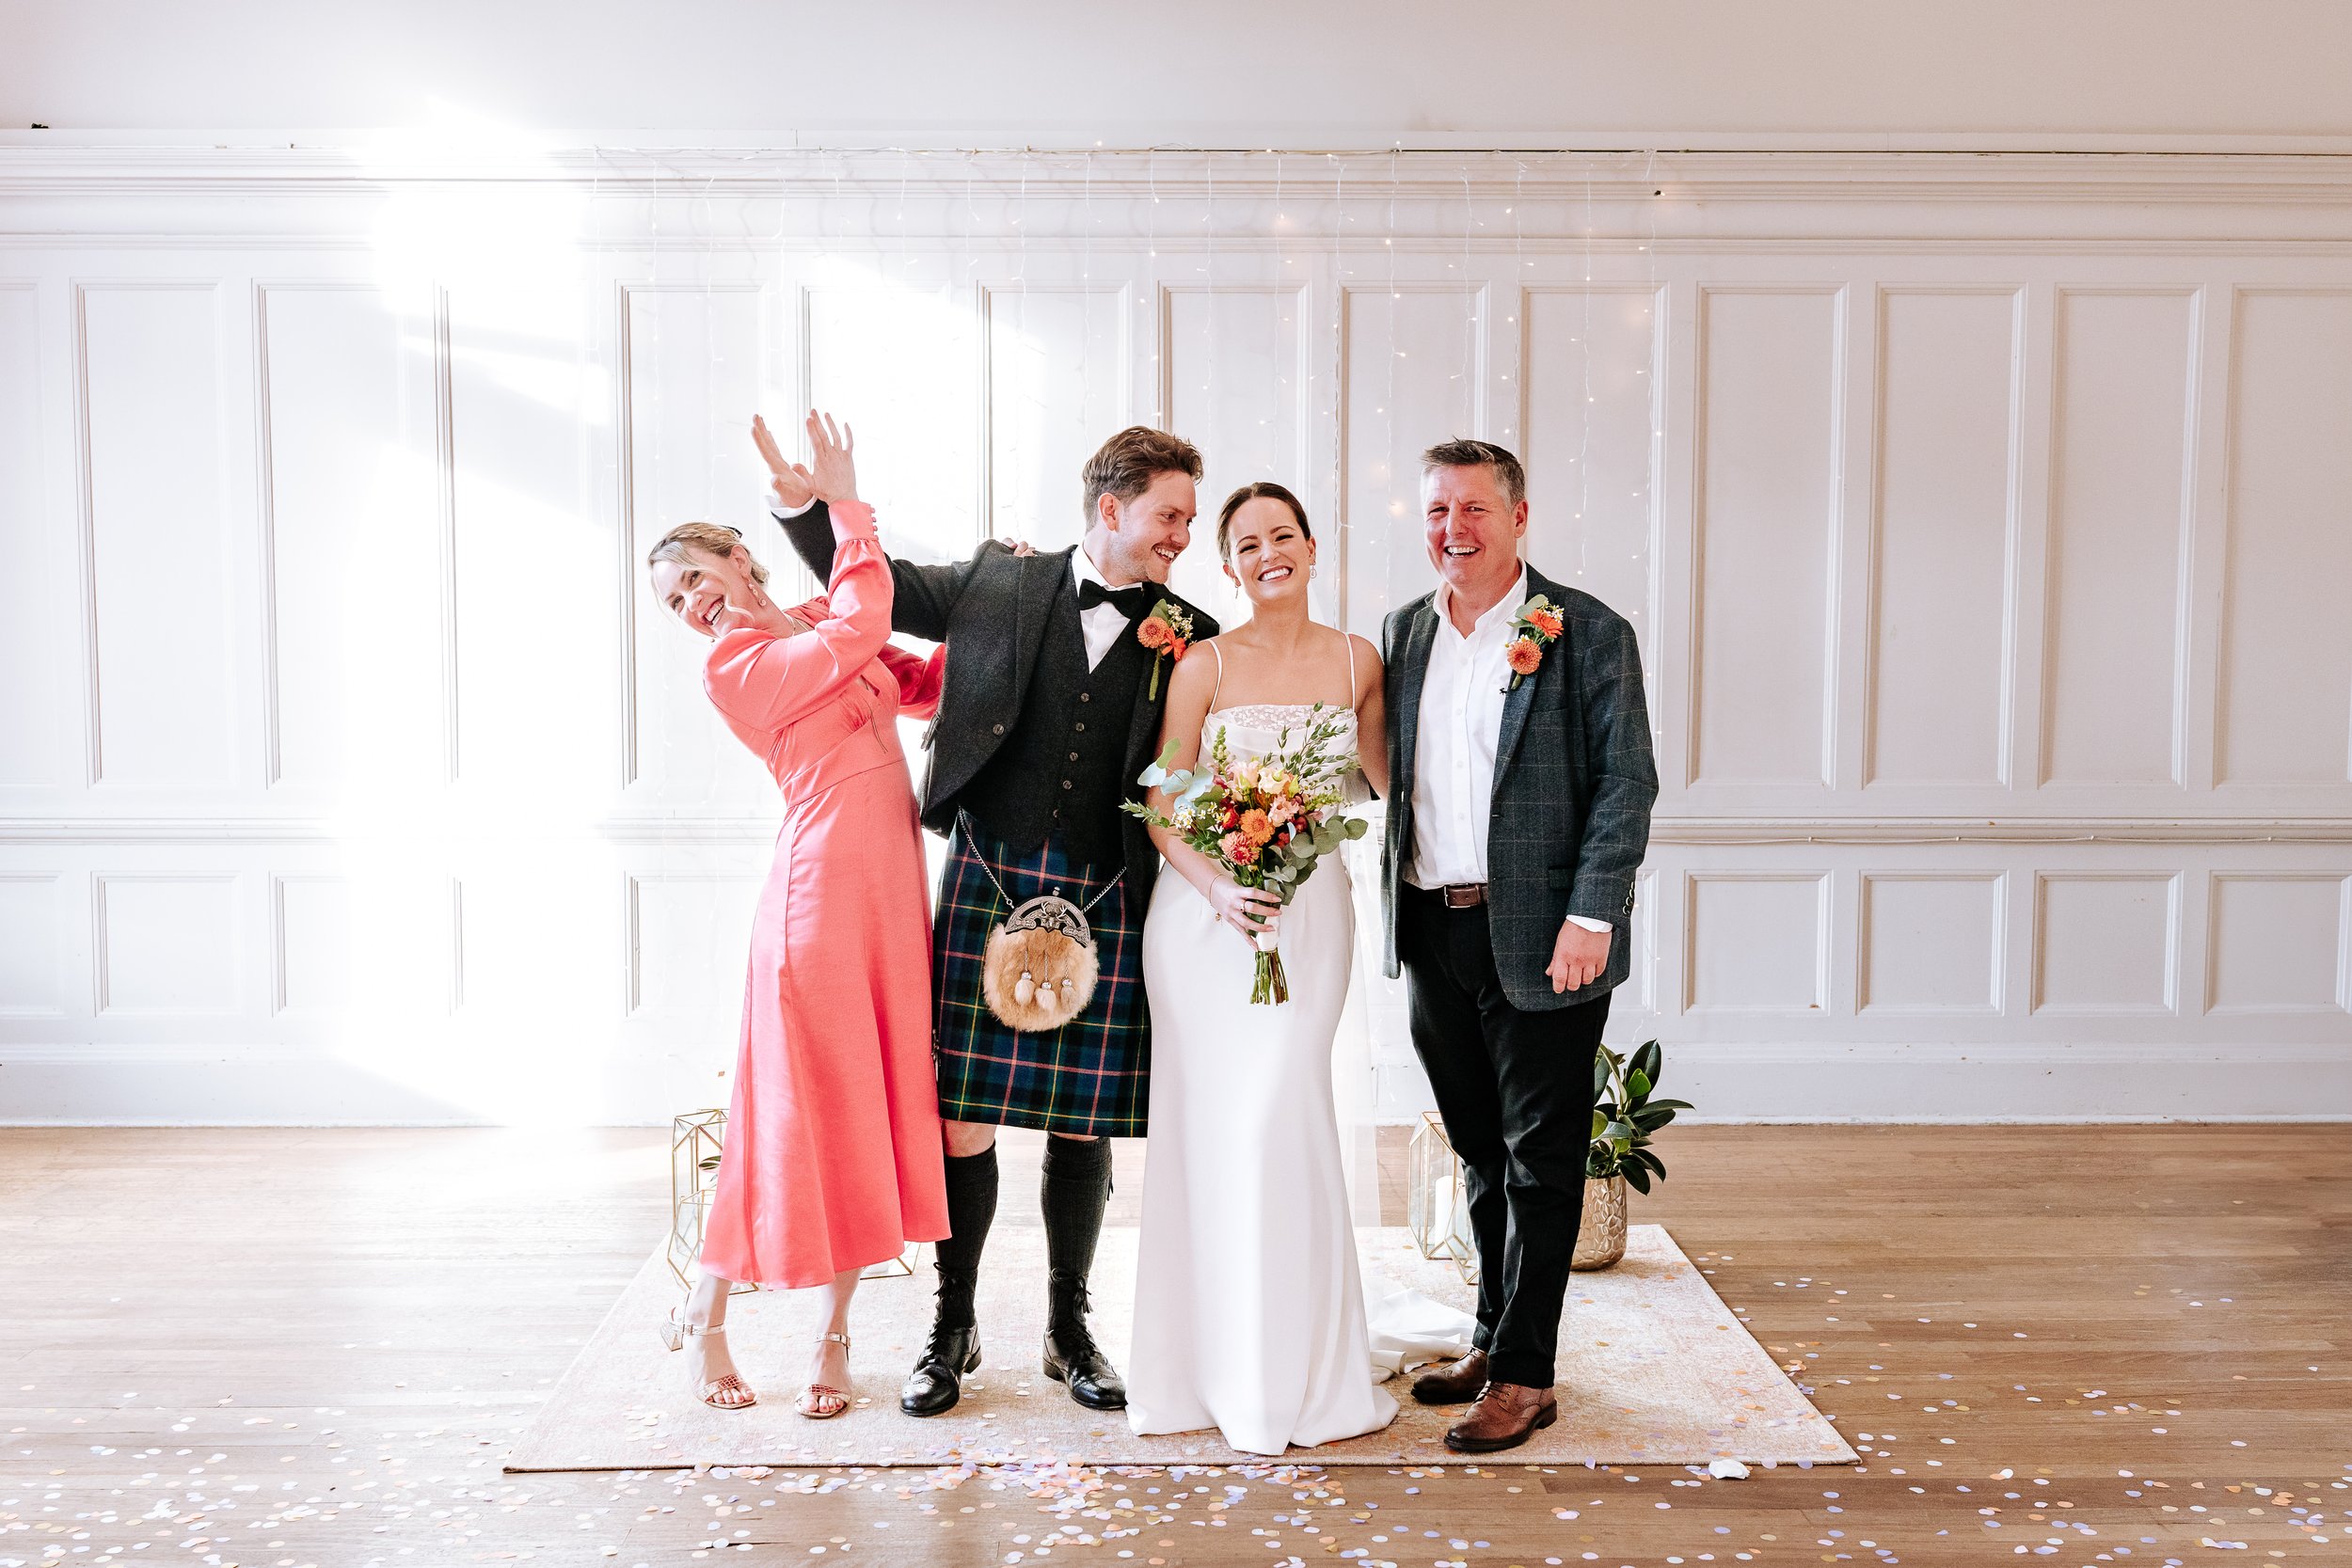 Finding the perfect wedding photographer - Lou Rob Photo - Edinburgh Wedding Photographer